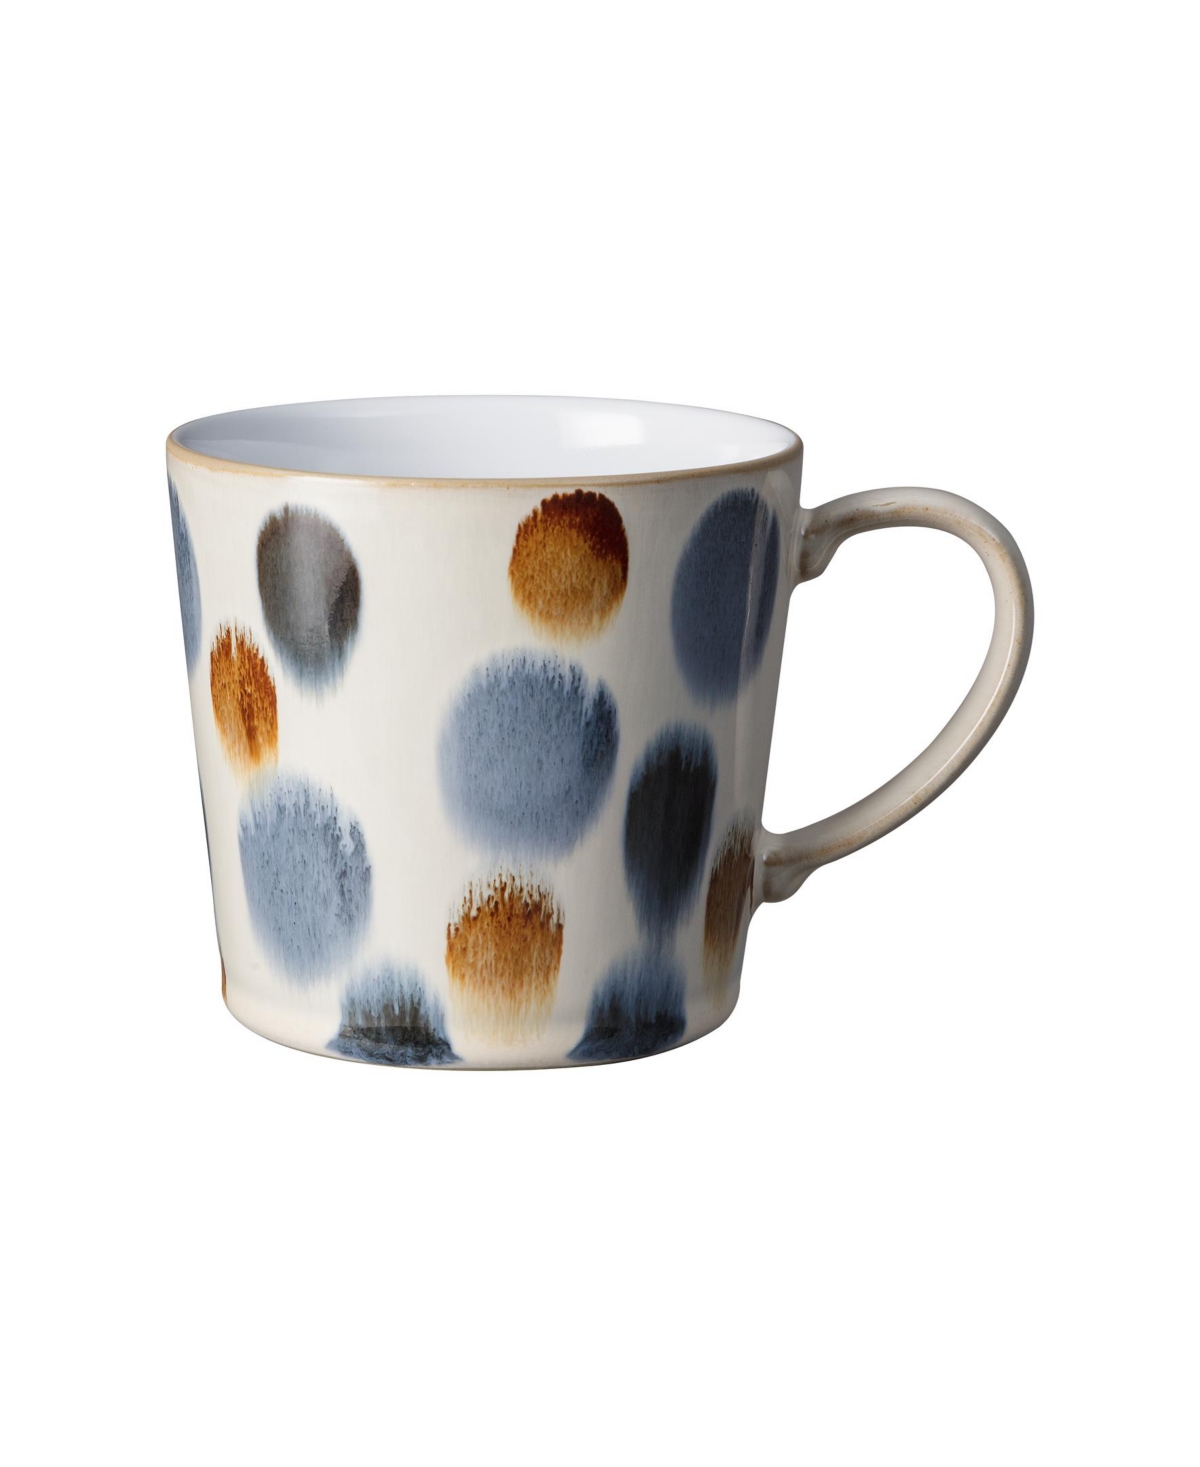 Brown Spot Painted Large Mug - Multi Colored And Hand Painted